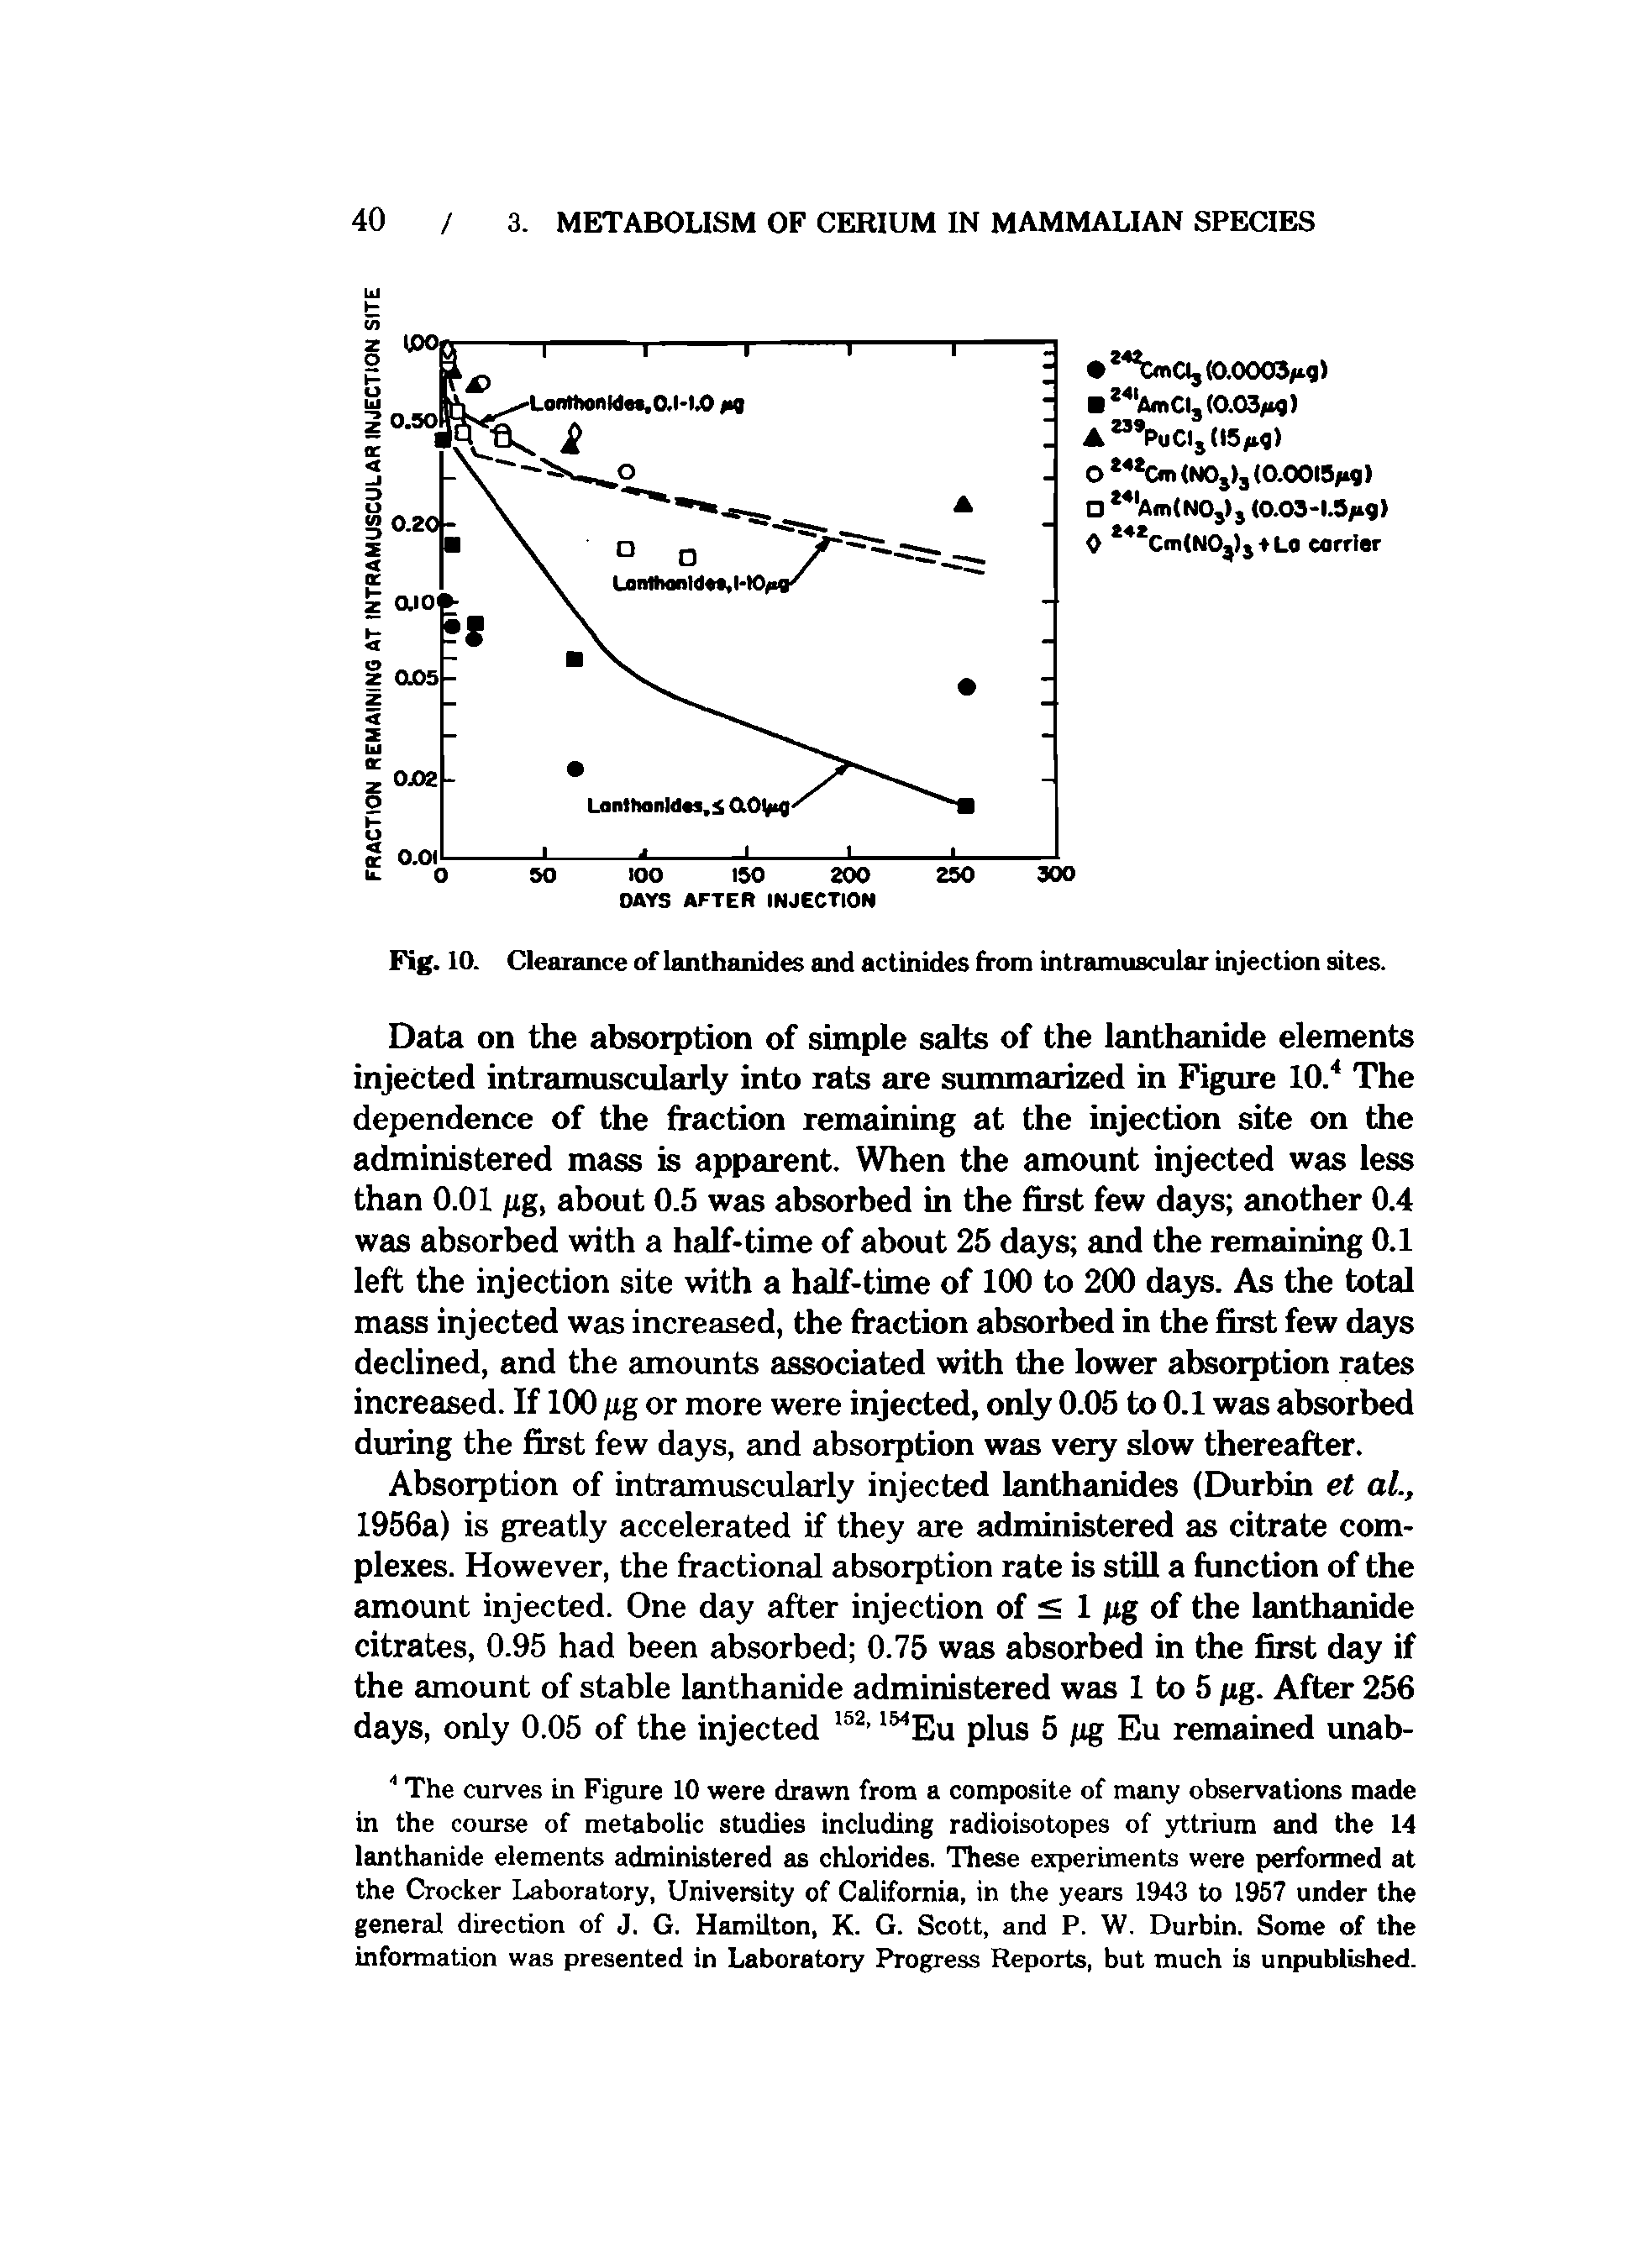 Fig. 10. Clearance of lanthanides and actinides from intramuscular injection sites.